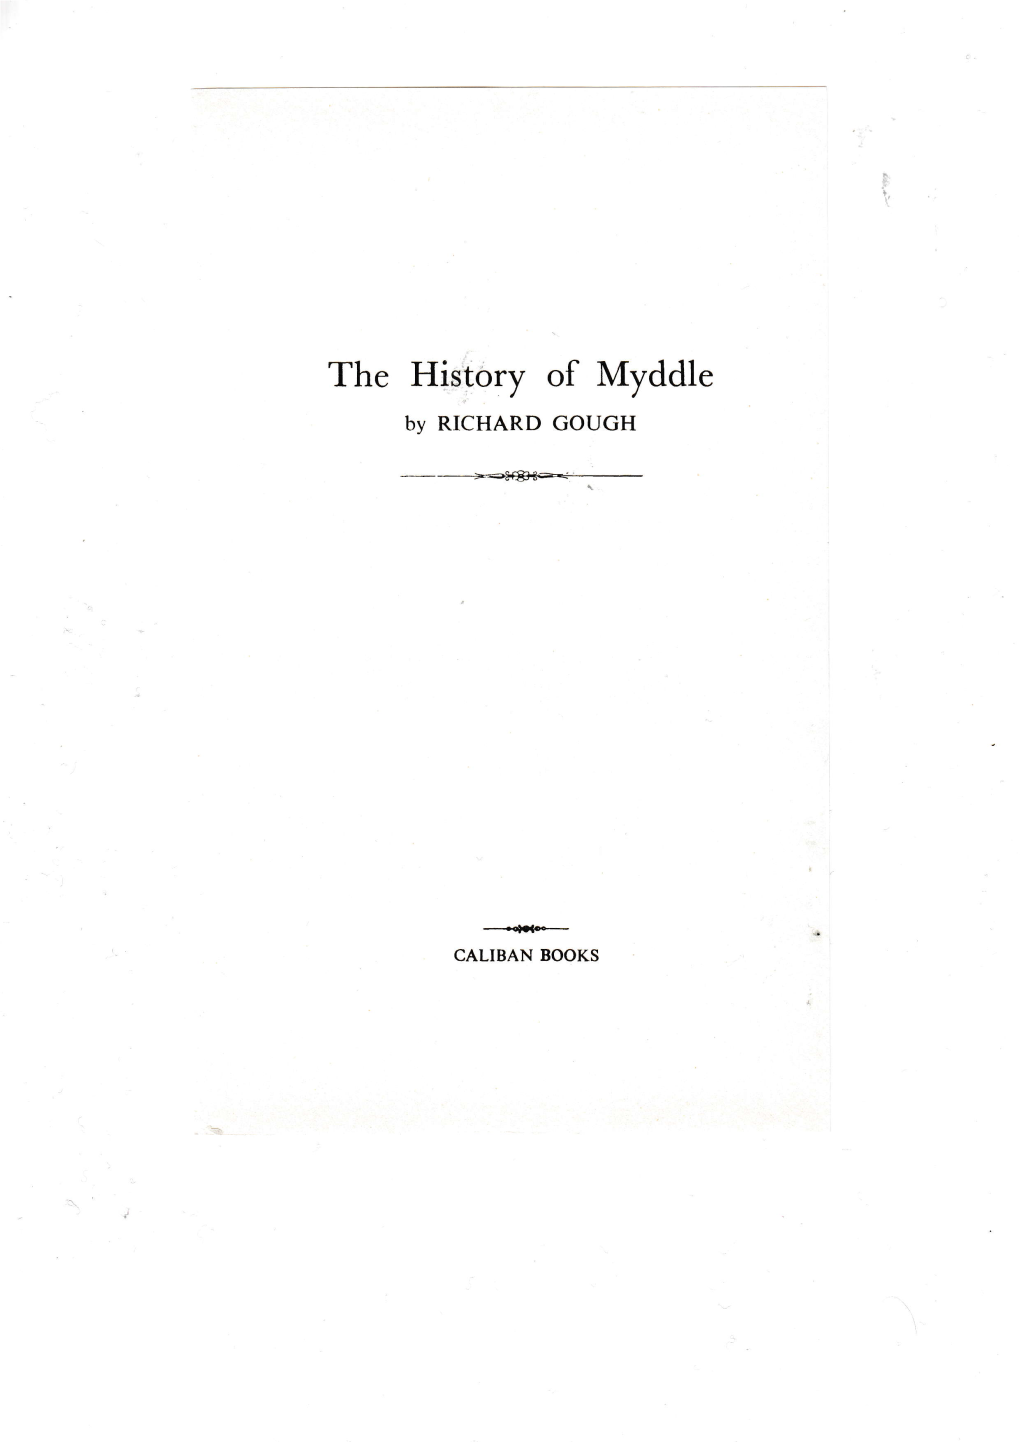 The History of Myddle by RICHARD GOUGH